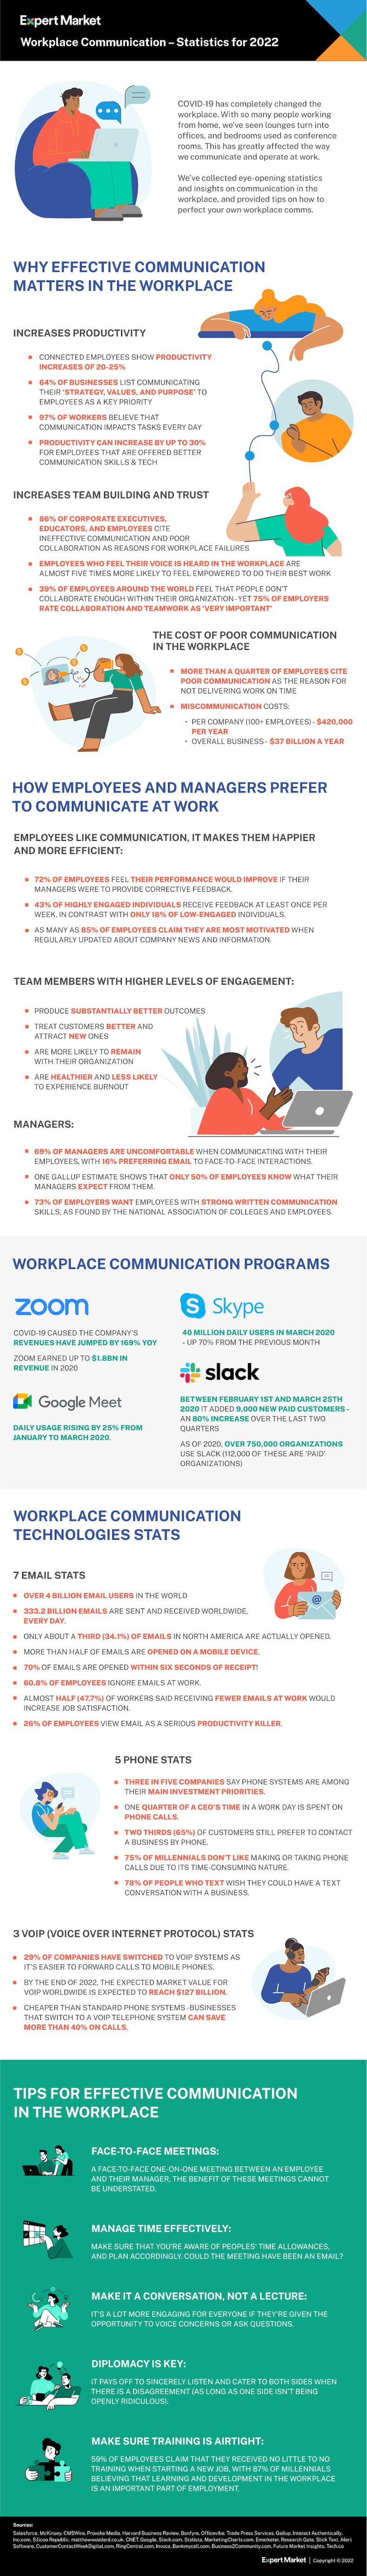 Workplace communication stats for 2022 infographic